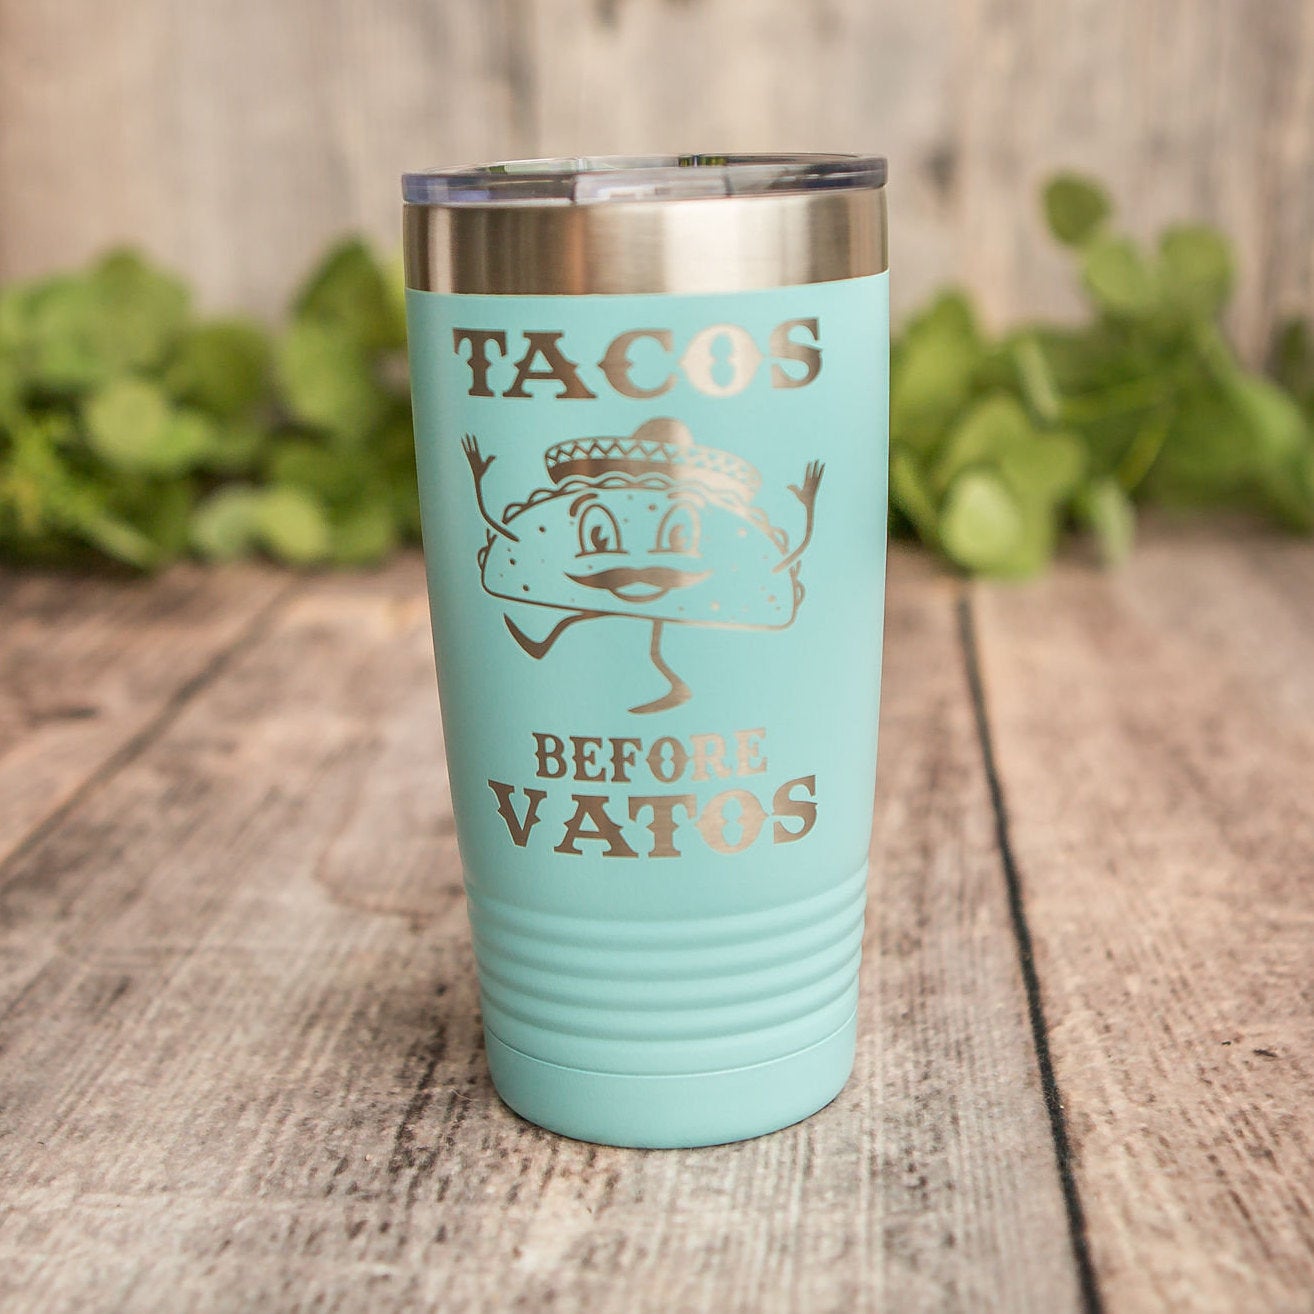 https://3cetching.com/wp-content/uploads/2020/09/tacos-before-vatos-engraved-stainless-steel-tumbler-yeti-style-cup-spanish-taco-gift-5f5fef49.jpg